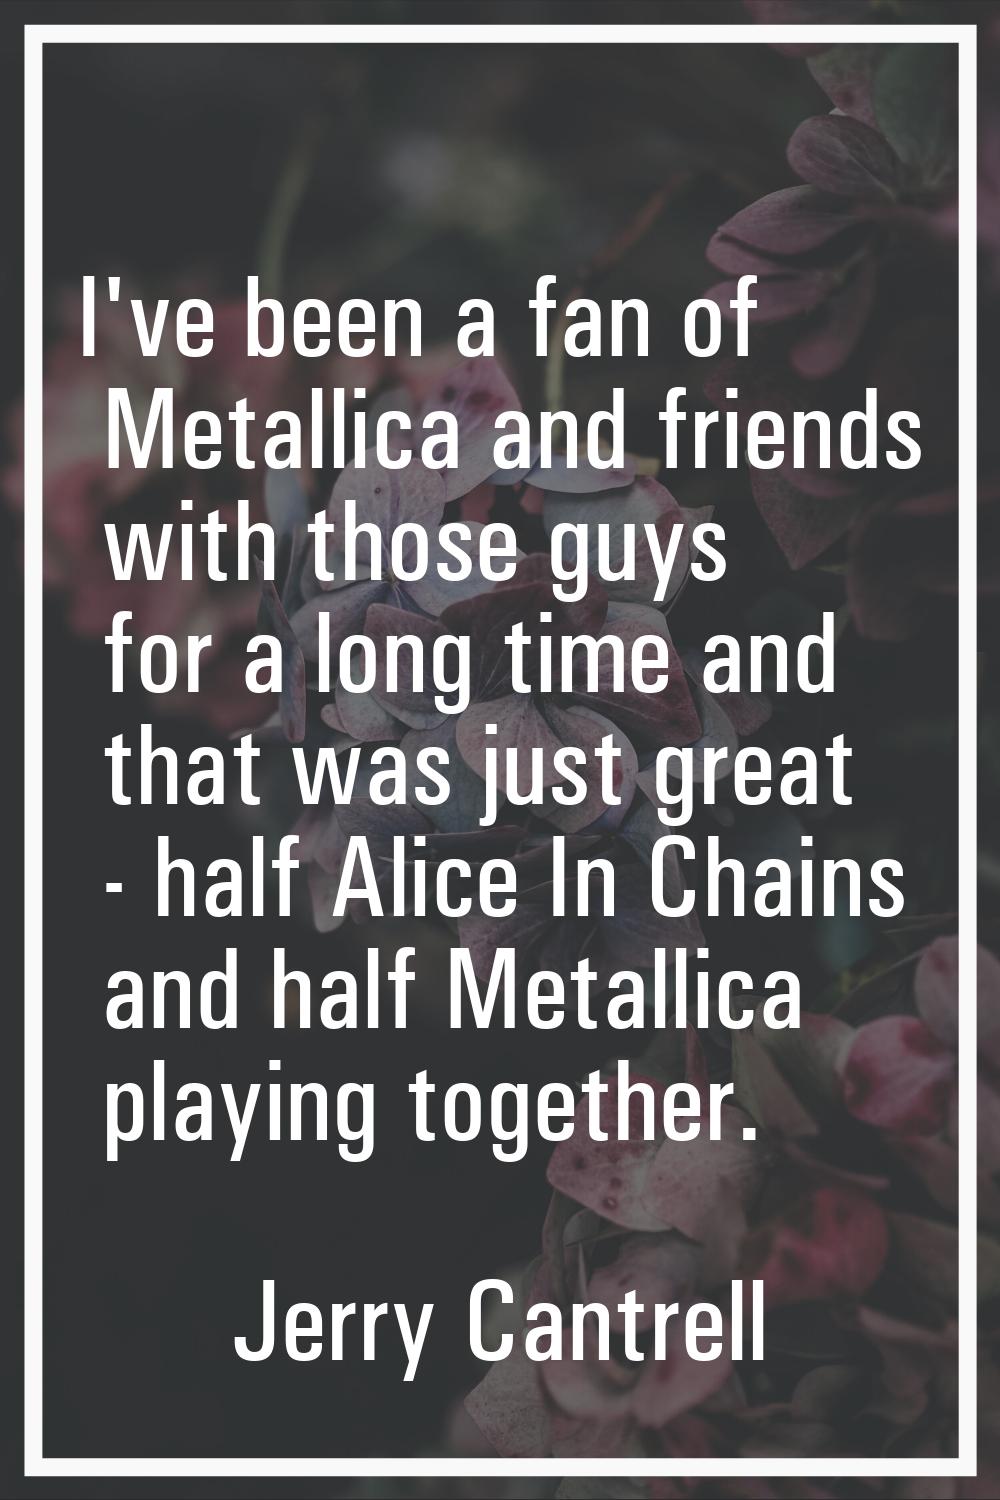 I've been a fan of Metallica and friends with those guys for a long time and that was just great - 